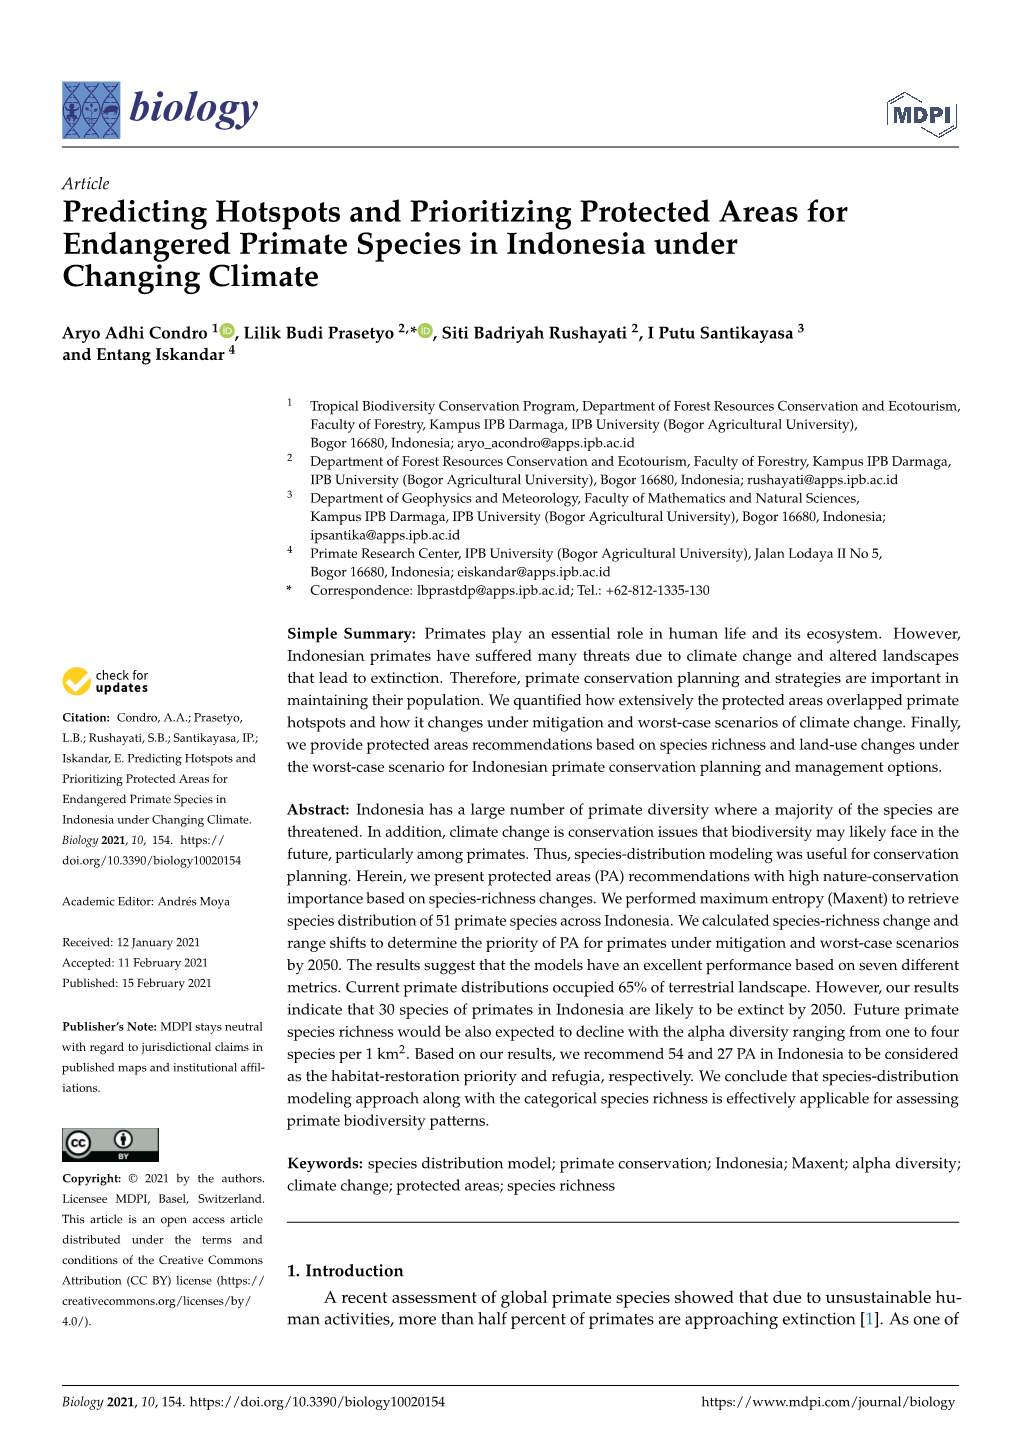 Predicting Hotspots and Prioritizing Protected Areas for Endangered Primate Species in Indonesia Under Changing Climate